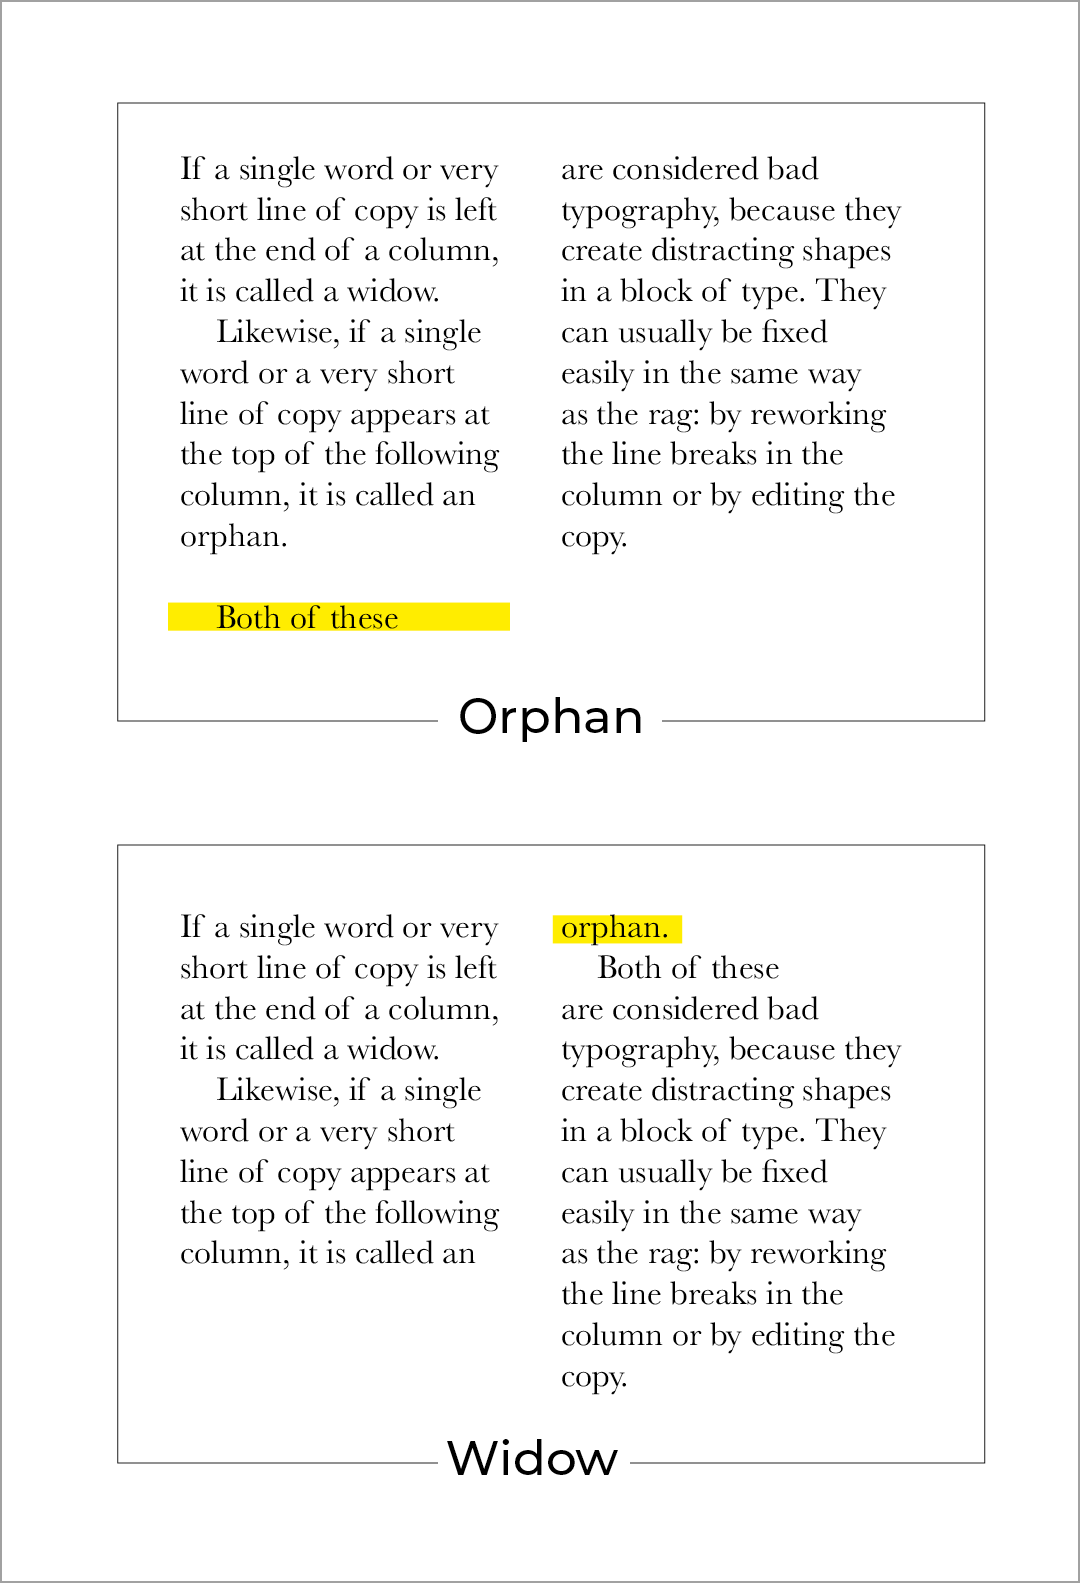 Orphan and widow example